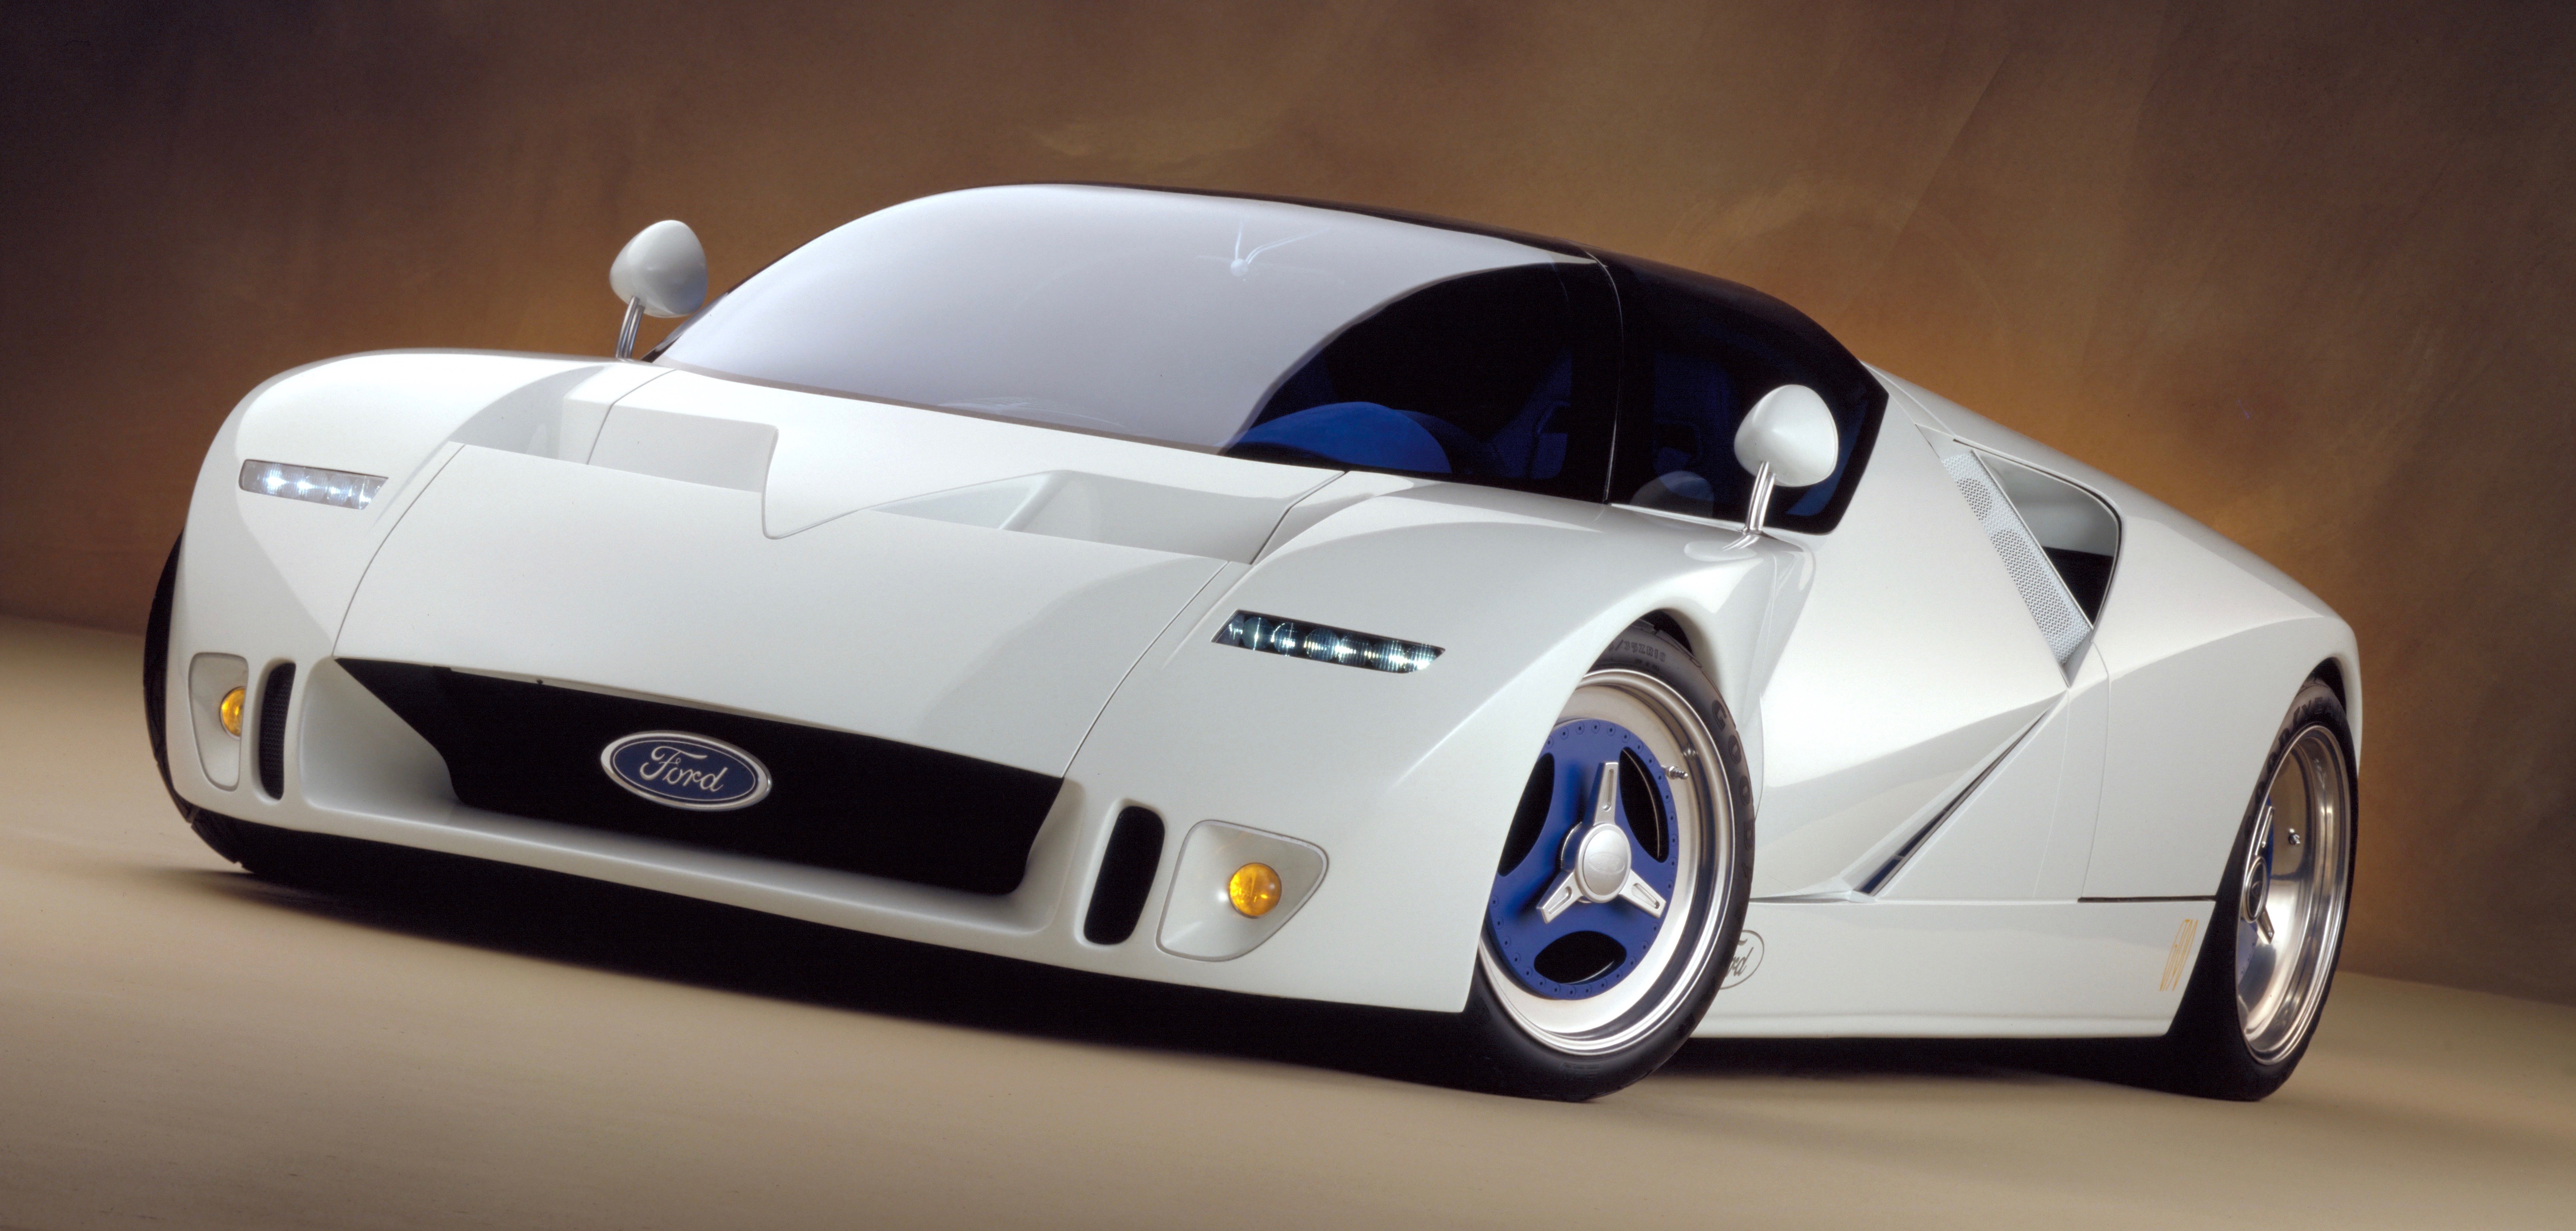 Top 10* American concept vehicles from the 1990s | ClassicCars.com